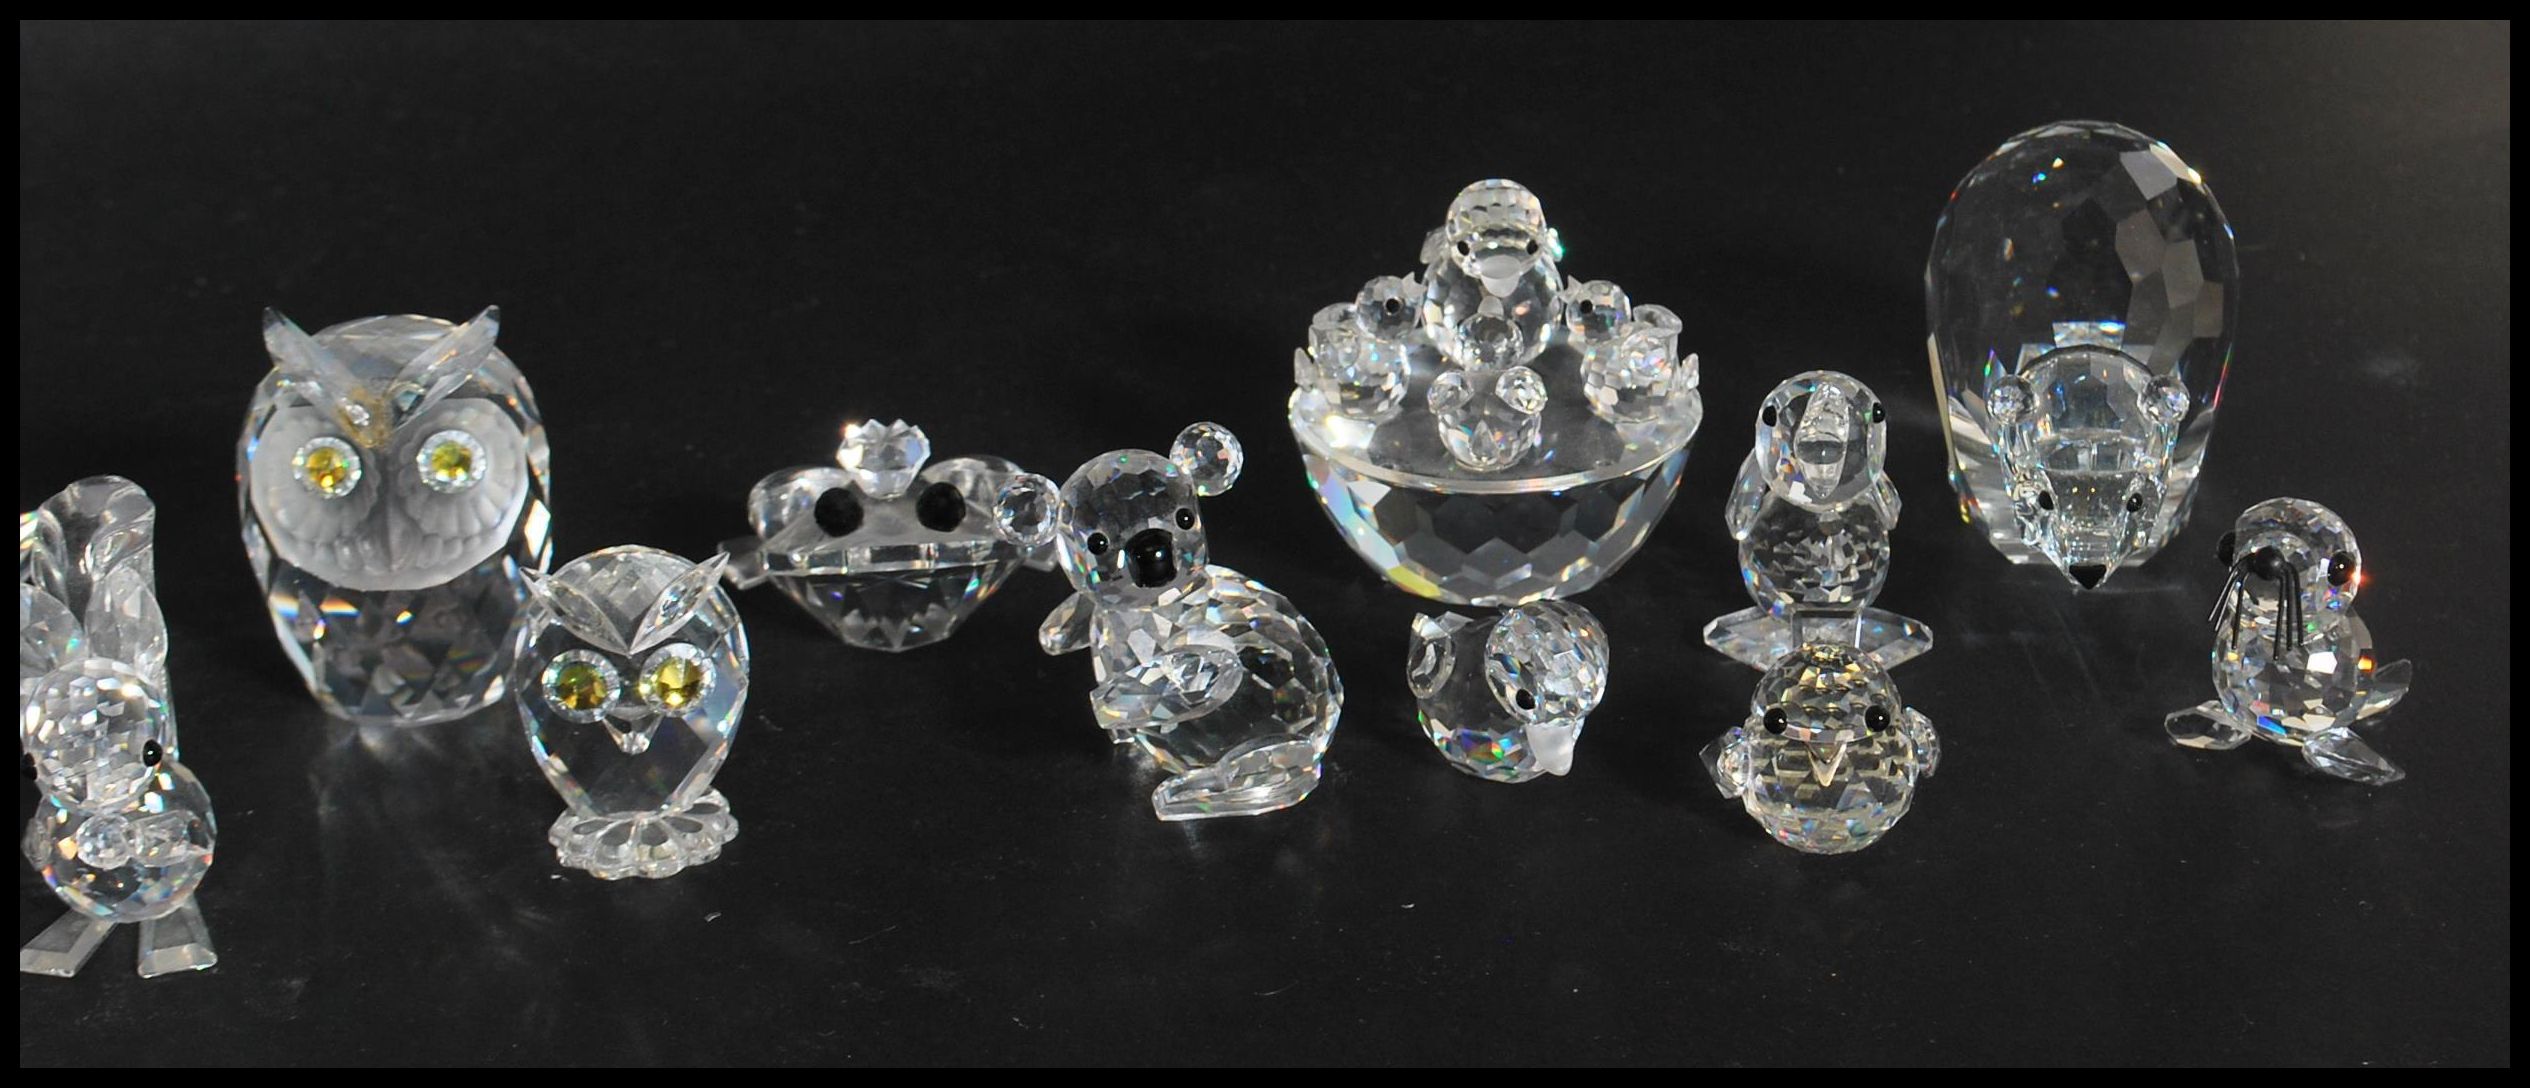 A good extensive collection of Swarovski crystals to include polar bear, mice, butterflies, frogs, - Image 12 of 12